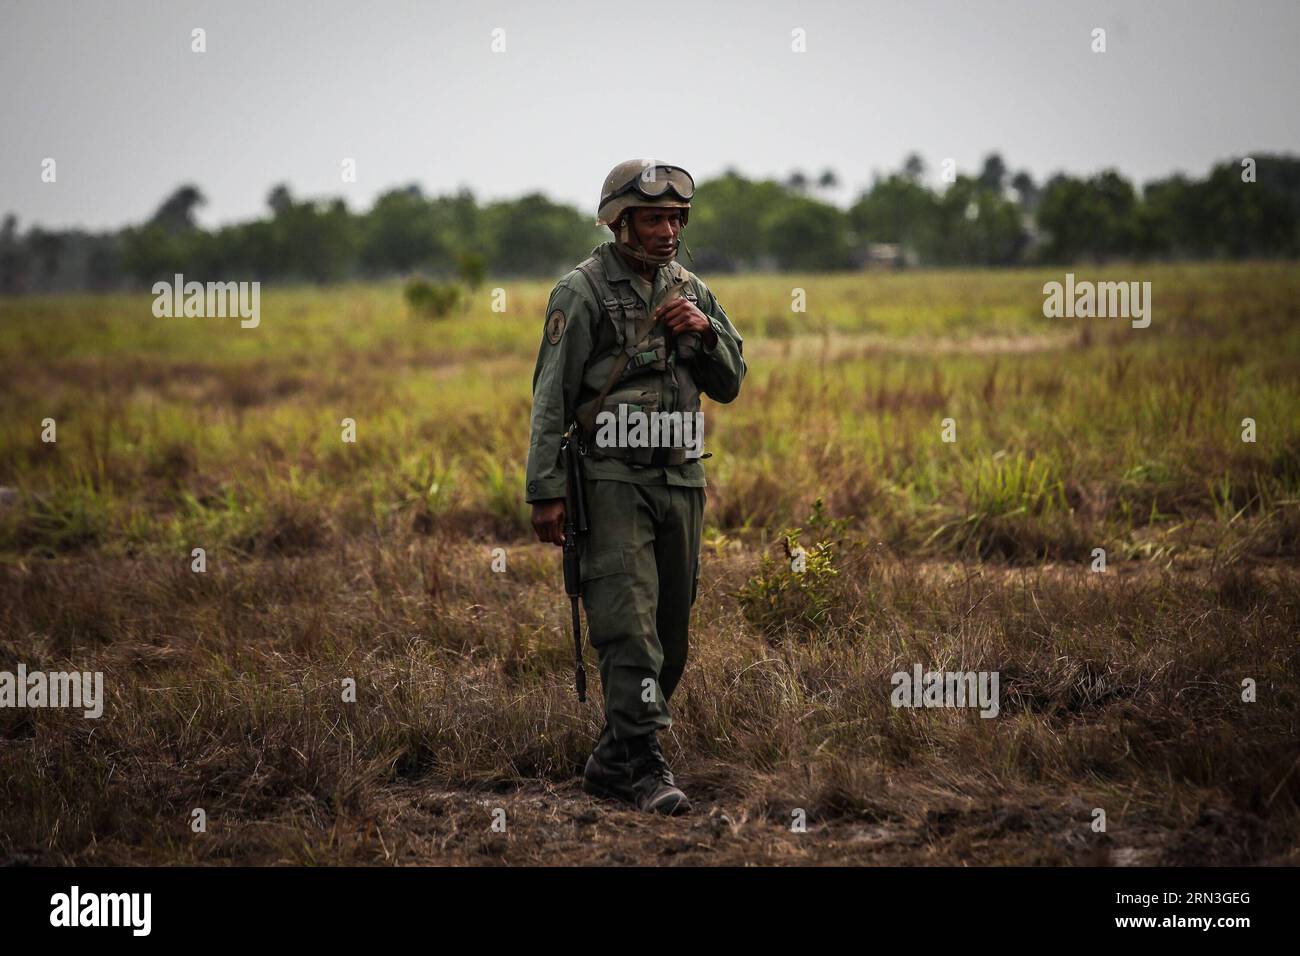 (150415) -- APURE, April 15, 2015 -- A member of the Bolivarian Armed National Force (FANB) takes part in the military exercise 2015 Sovereign Shield in San Carlos del Meta, Apure state, Venezuela, on April 15, 2015. The FANB held a military exercise of antiaircraft artillery drill 2015 Sovereign Shield with the participation of 480 military members, according to local press. Boris Vergara) (azp) VENEZUELA-APURE-MILITARY-EXERCISE e BorisxVergara PUBLICATIONxNOTxINxCHN   April 15 2015 a member of The Bolivarian Armed National Force  Takes Part in The Military EXERCISE 2015 Sovereign Shield in S Stock Photo